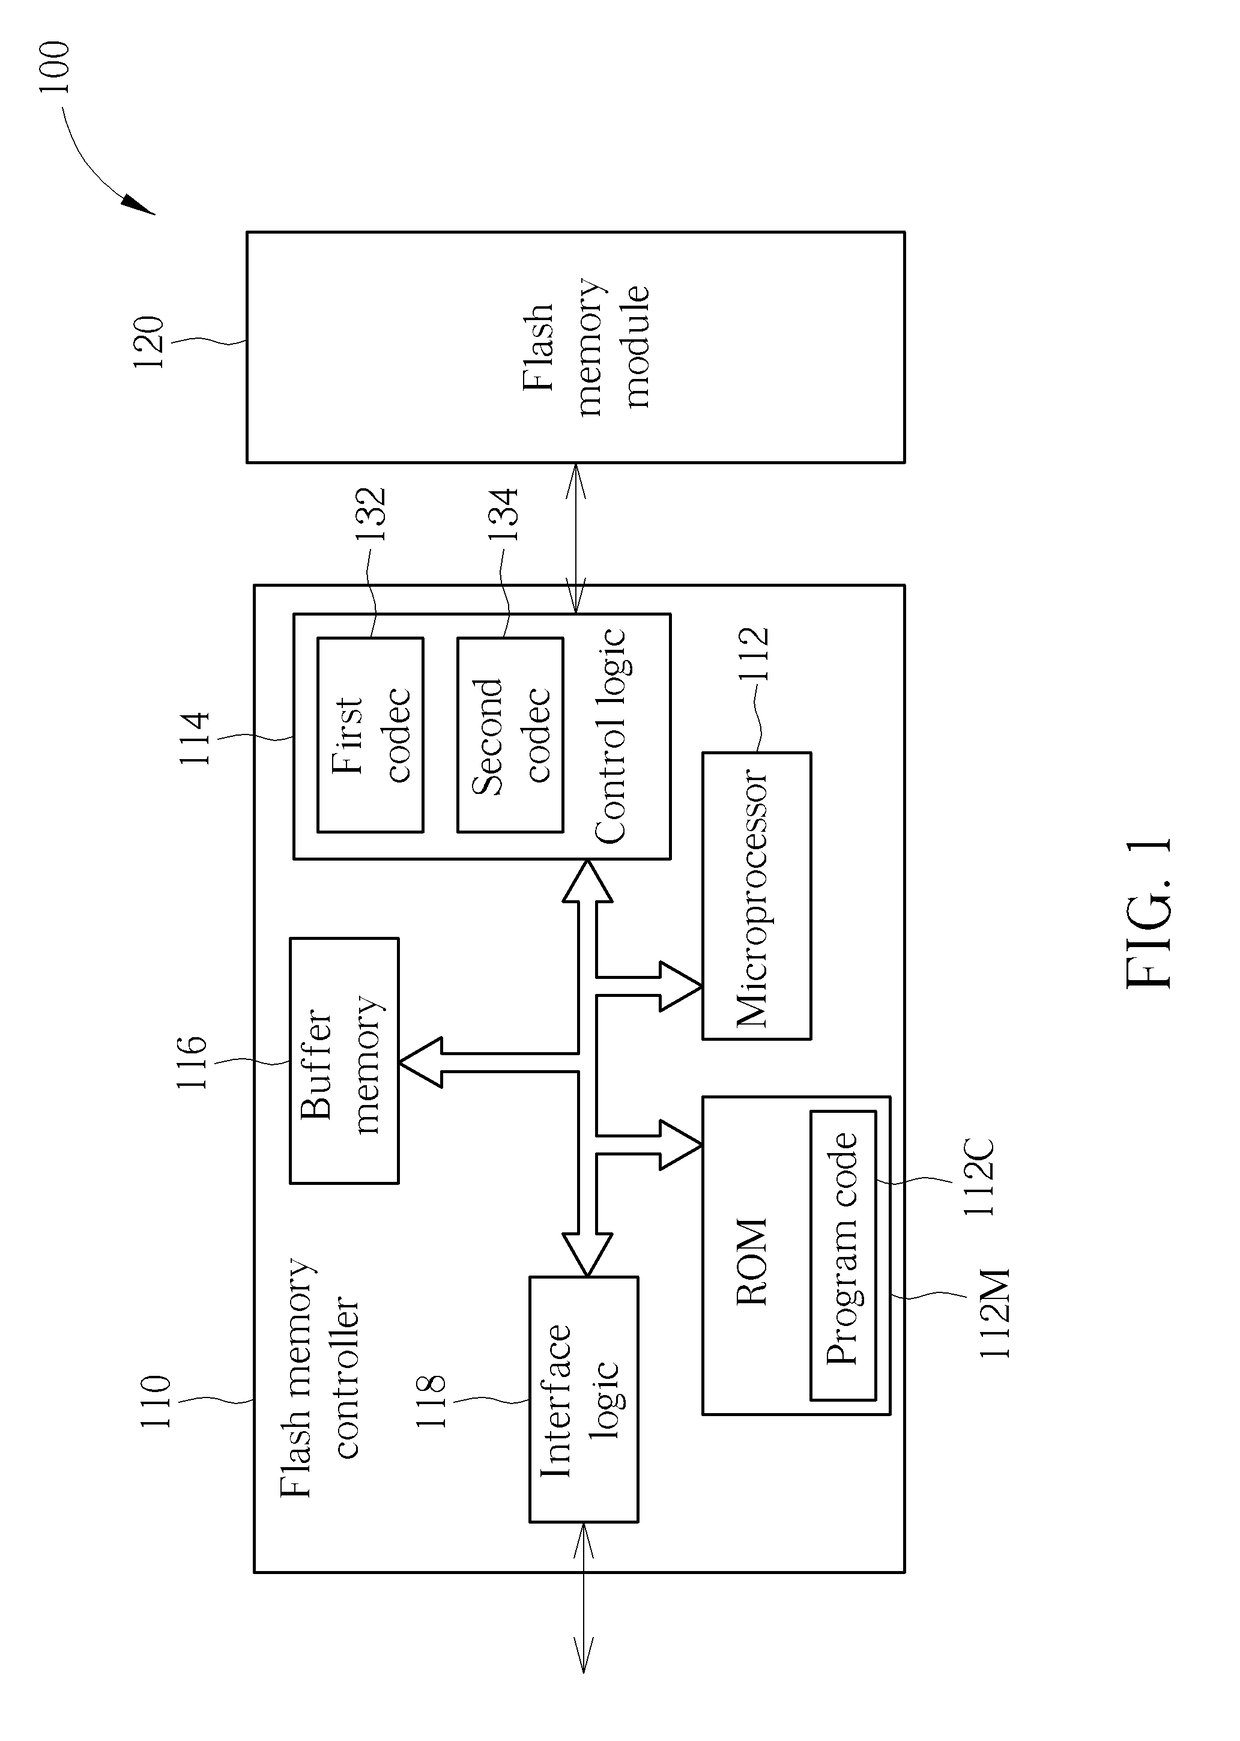 Method, flash memory controller, memory device for accessing flash memory